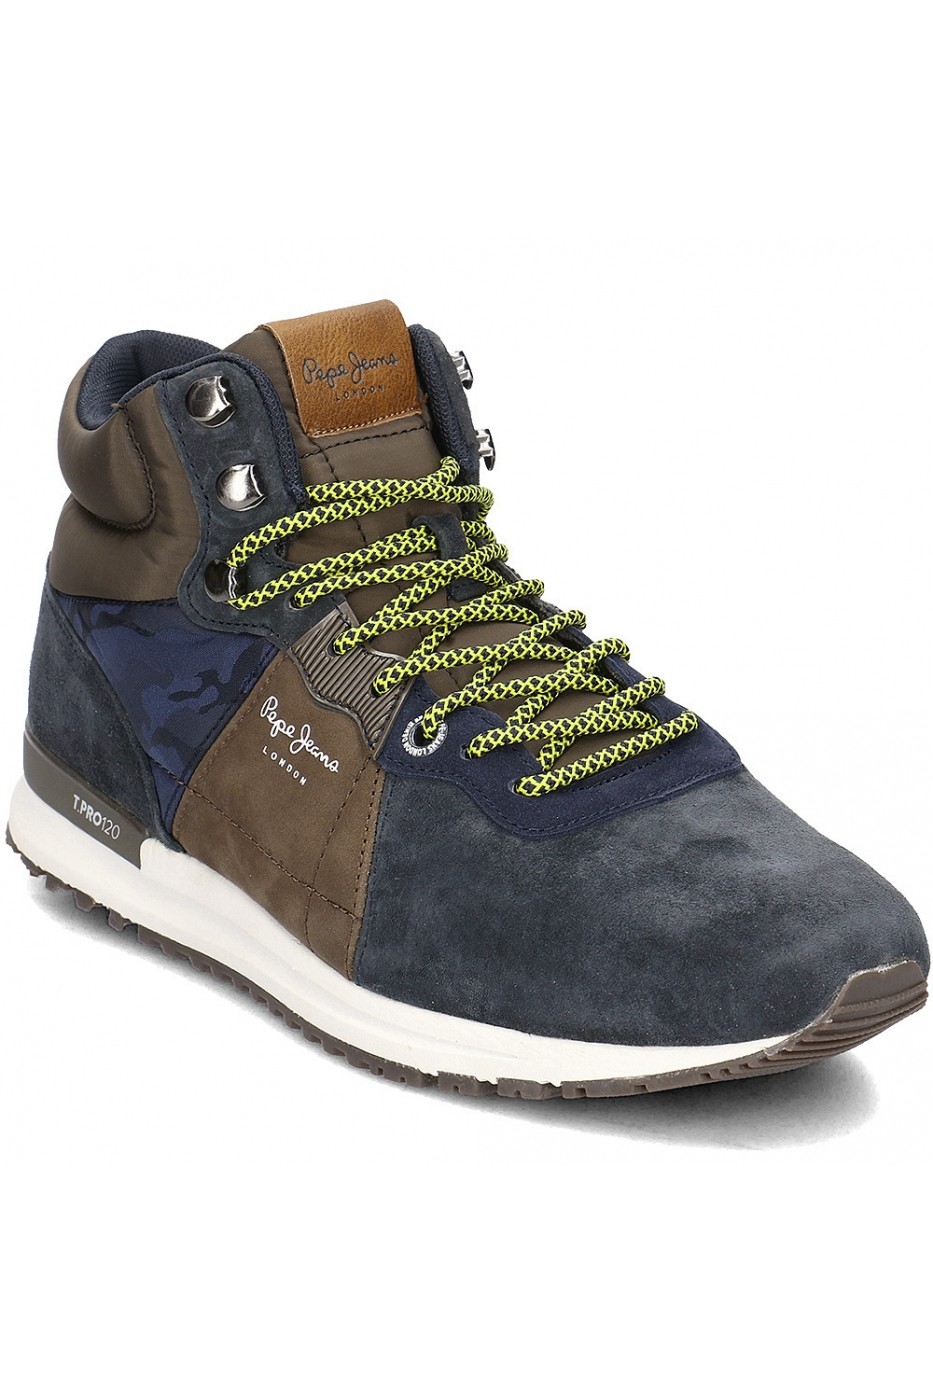 today Starting point Outlook Ghete barbati Pepe Jeans Tinker Pro-Boot PMS30490-595 - FashionUP!